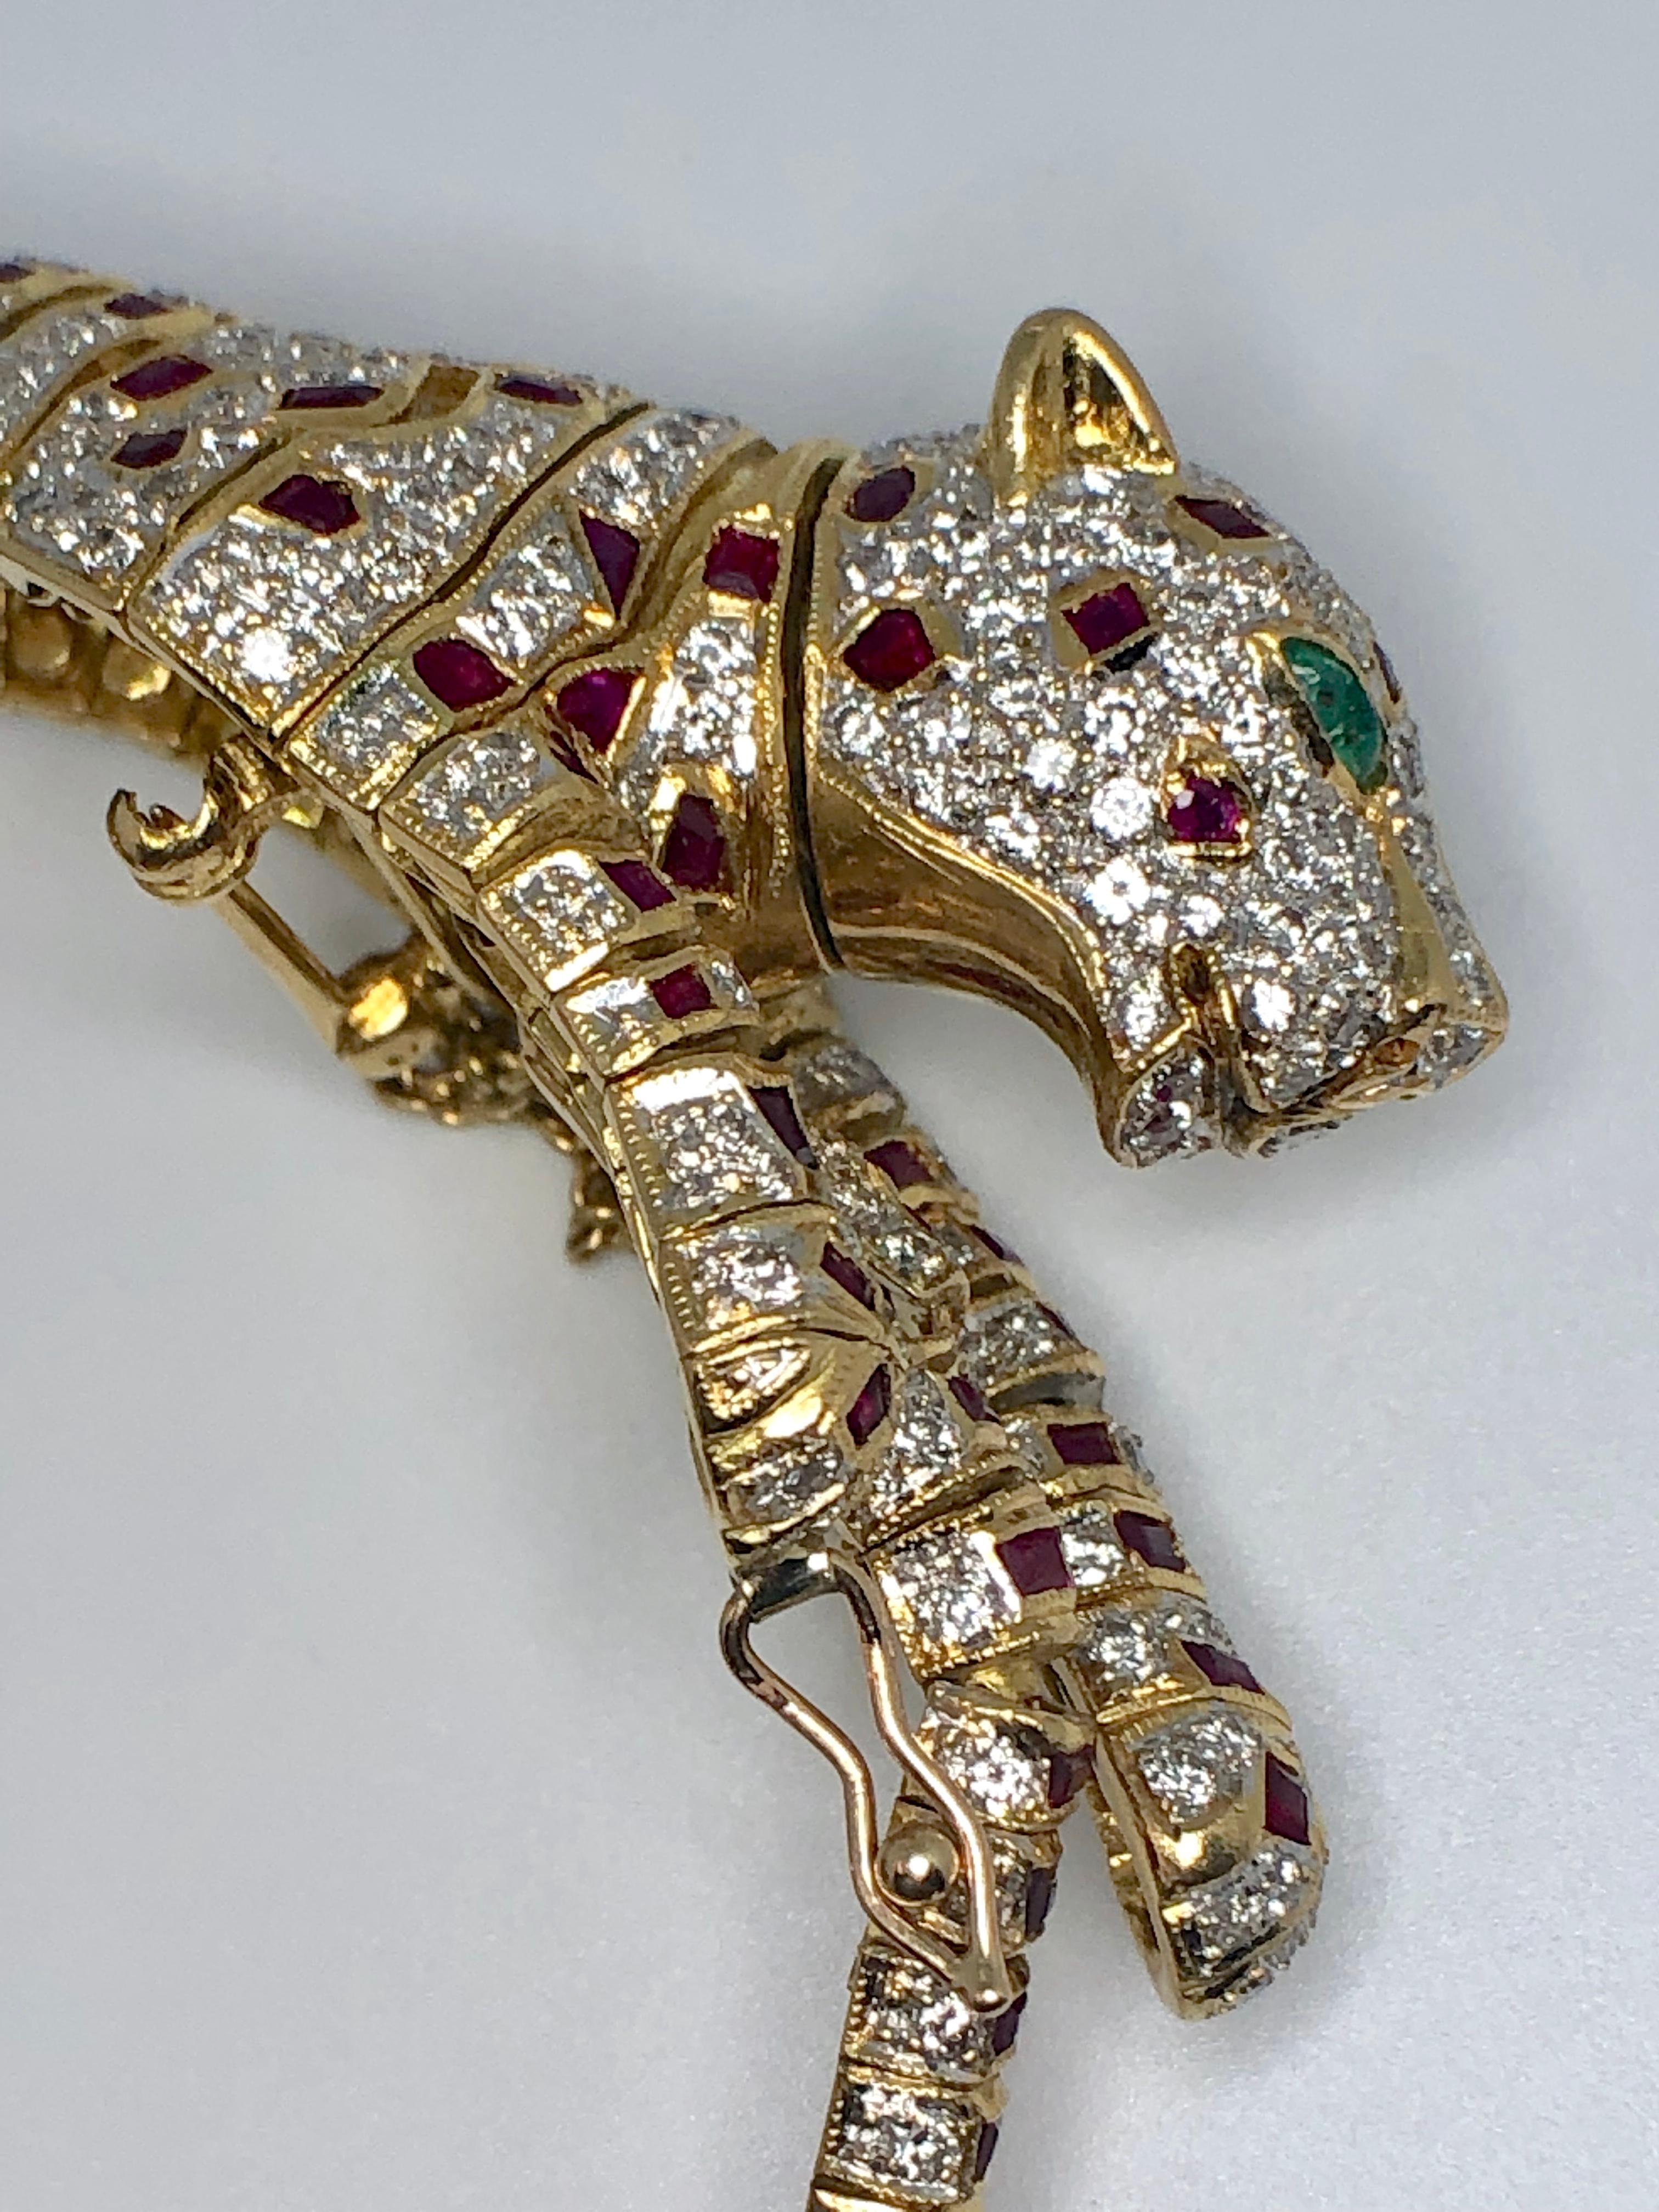 Lady's 18 Karat Yellow Gold Diamond, Ruby and Emerald Panther Bracelet or Brooch 10